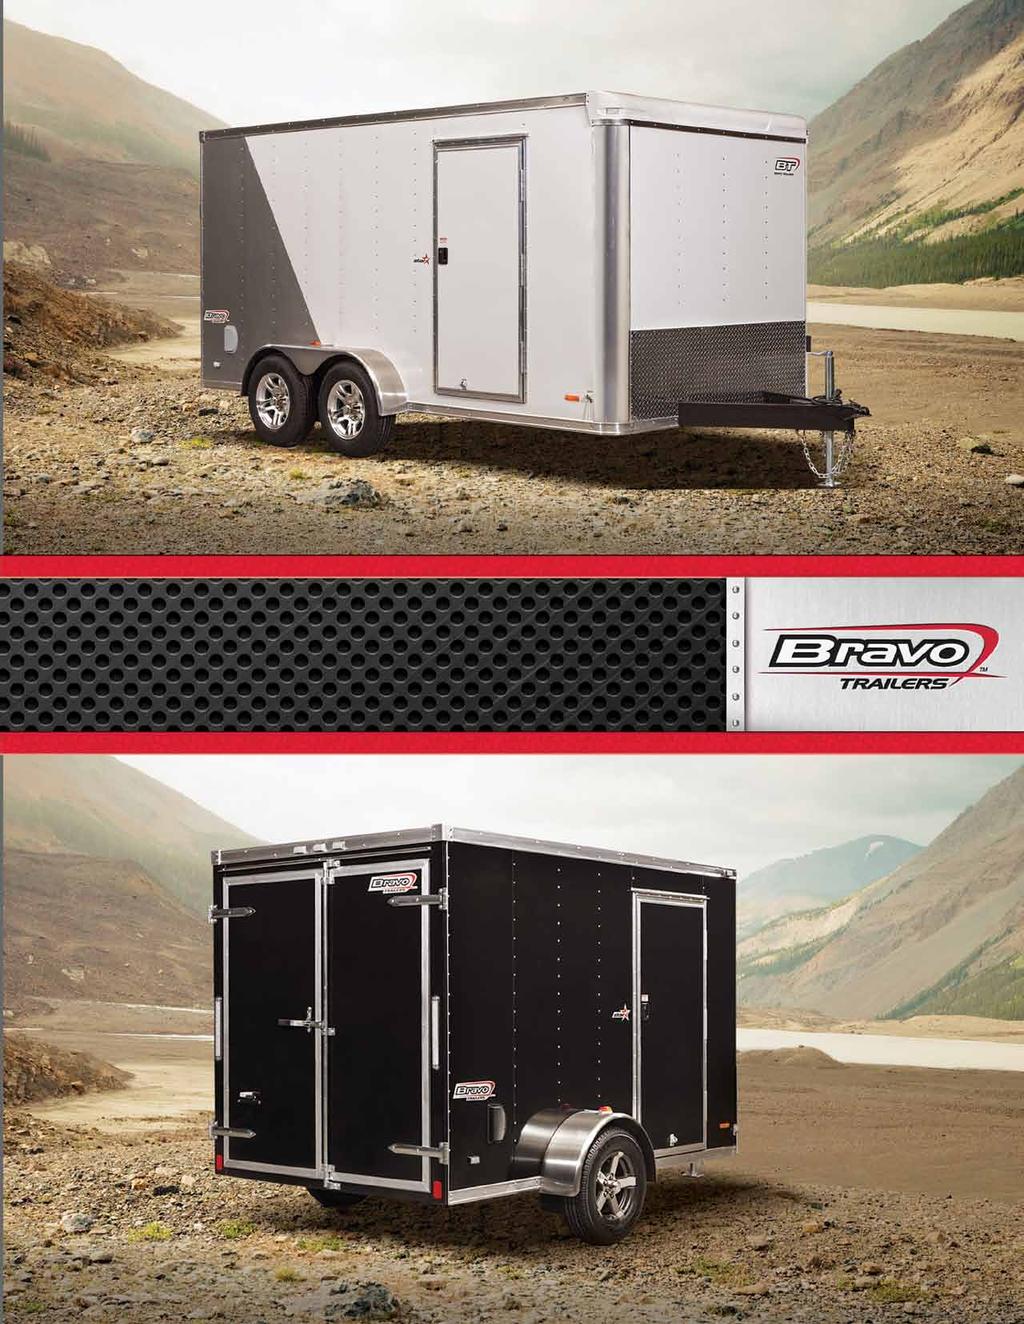 cargo trailers 7 x 14 a higher standard of performance